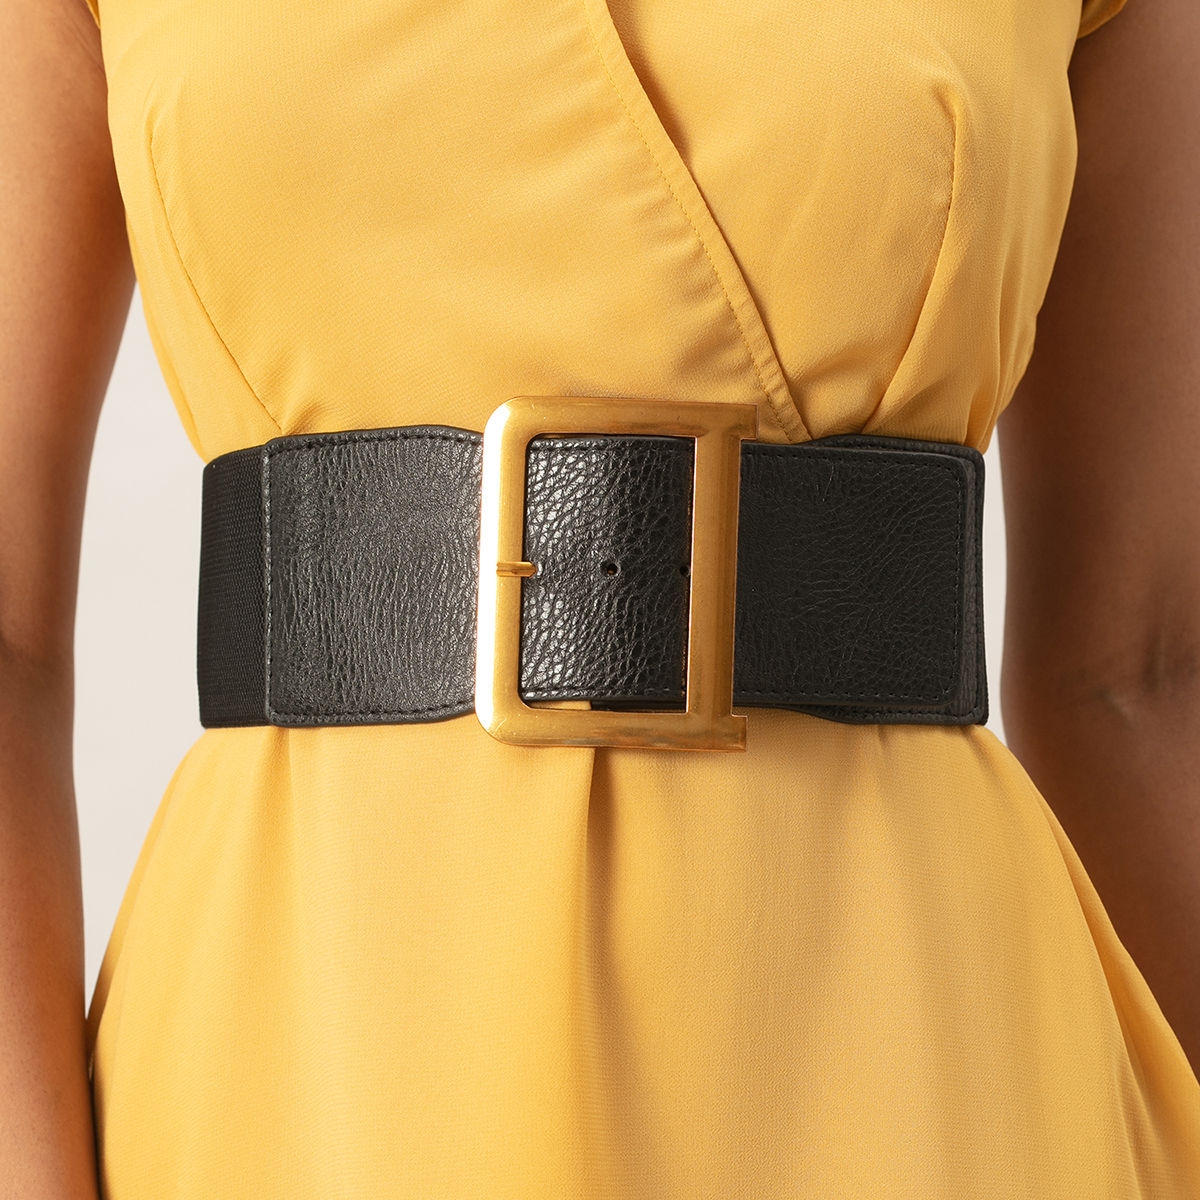 Twenty Dresses by Nykaa Fashion Black Solid Antique Textured Gold Buckle Belt (Black) At Nykaa, Best Beauty Products Online